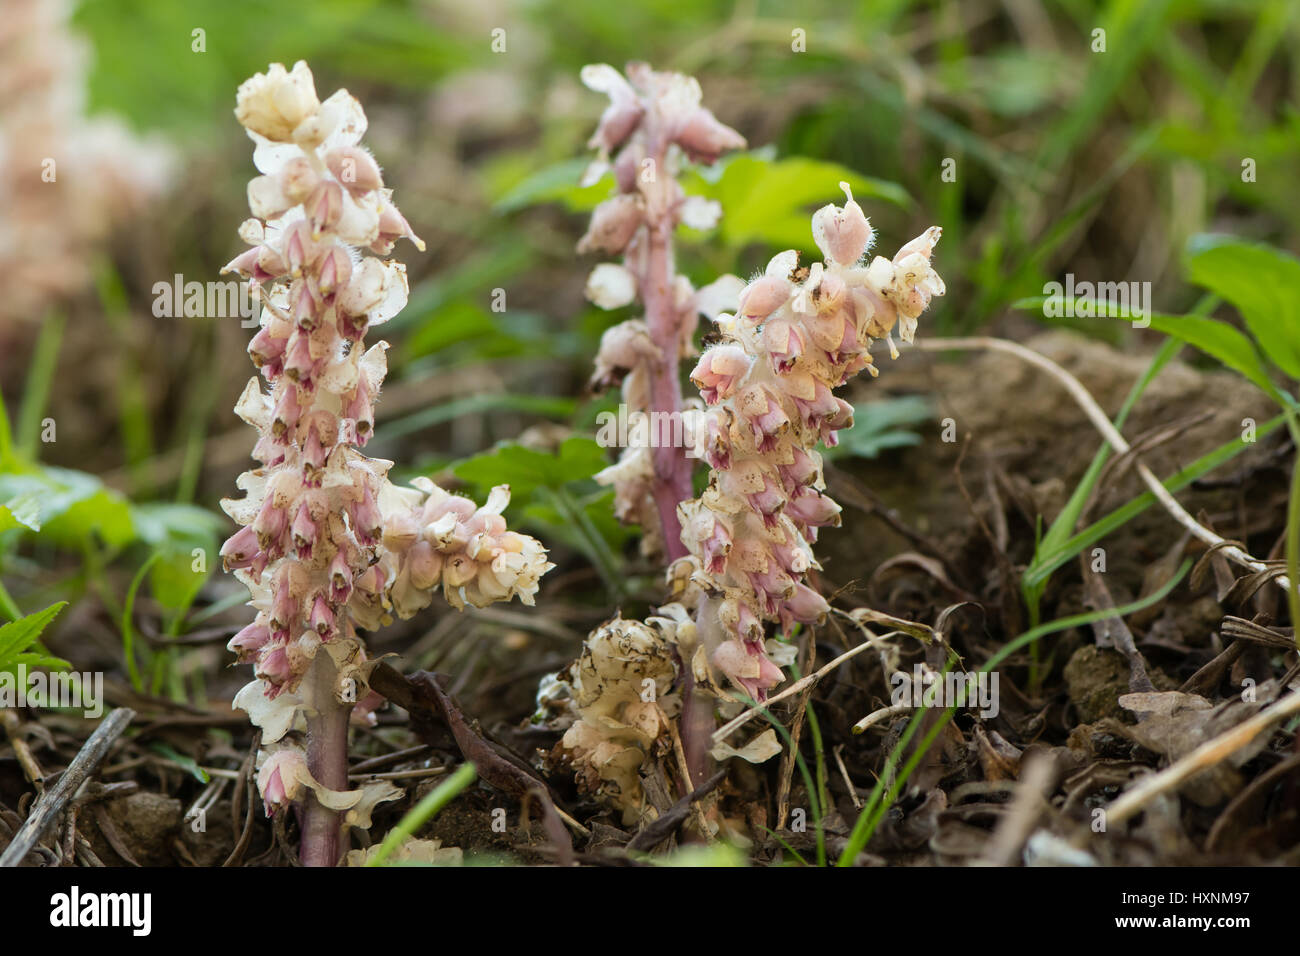 Toothwort (Lathraea squamaria) plant in flower. Group of parasitic plants with pink flowers in the family Orobanchaceae, infecting willow (Salix sp) Stock Photo